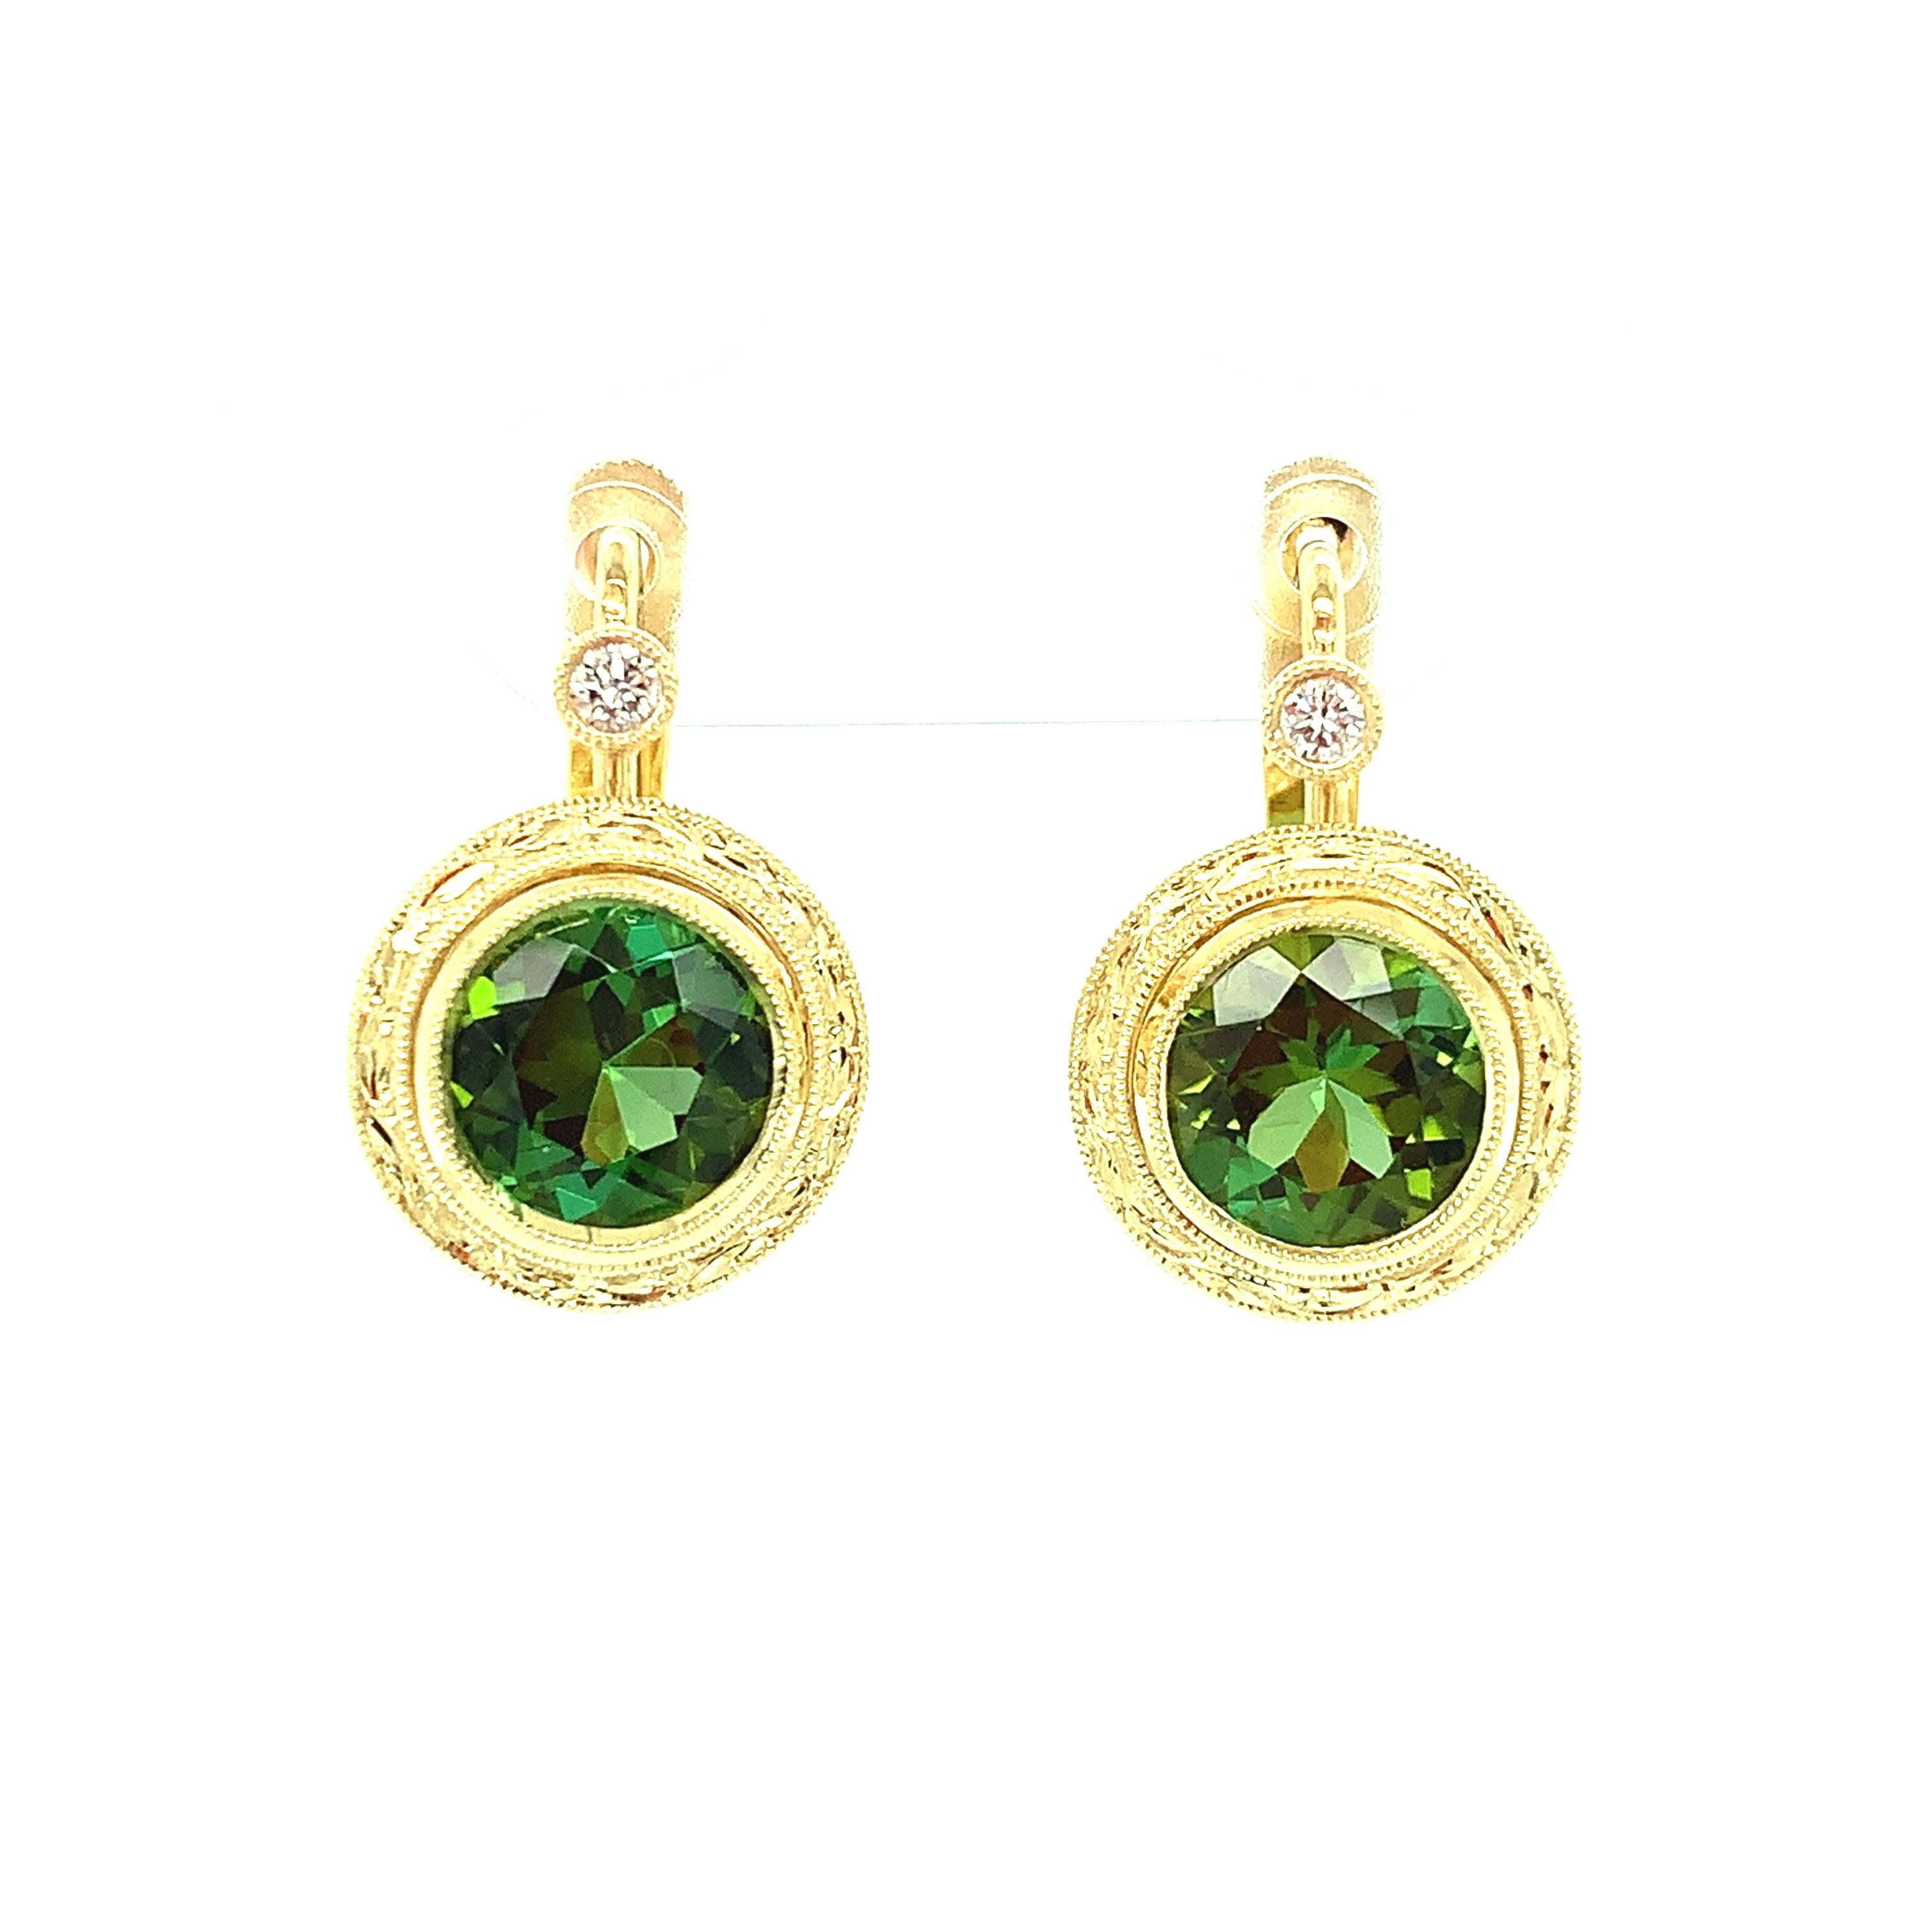 Large, brilliant, grass-green tourmalines are featured in these lovely 18k yellow gold, hand engraved drop earrings. Two brilliant diamonds provide add sparkle, and the lever backs keep them perfectly positioned. These earrings are a perfect 